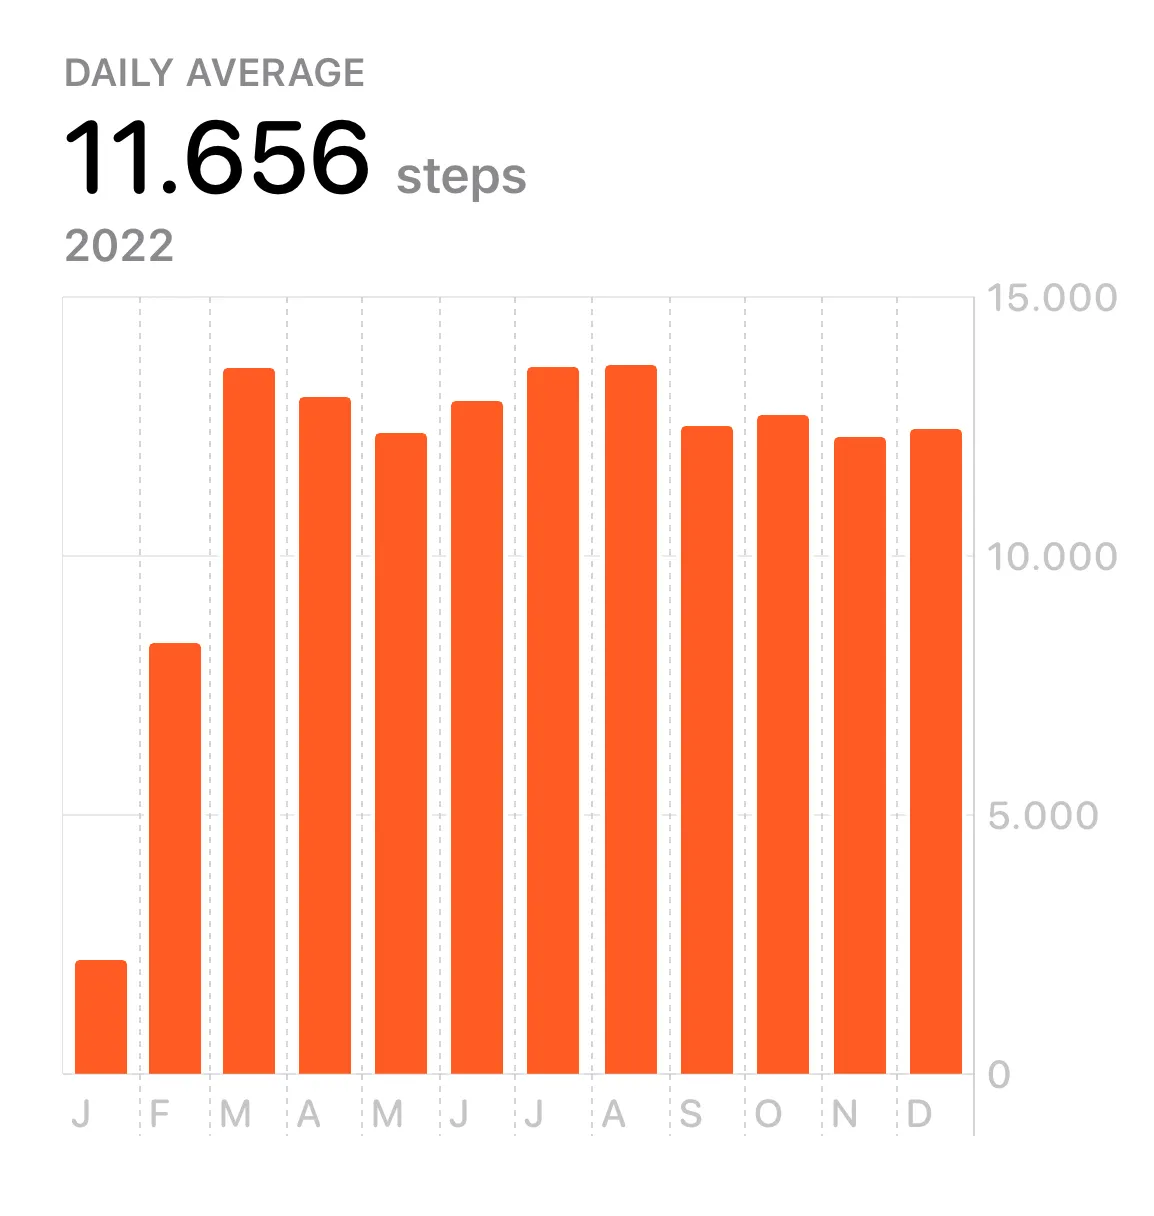 My daily average step count of 11.656 steps in 2022